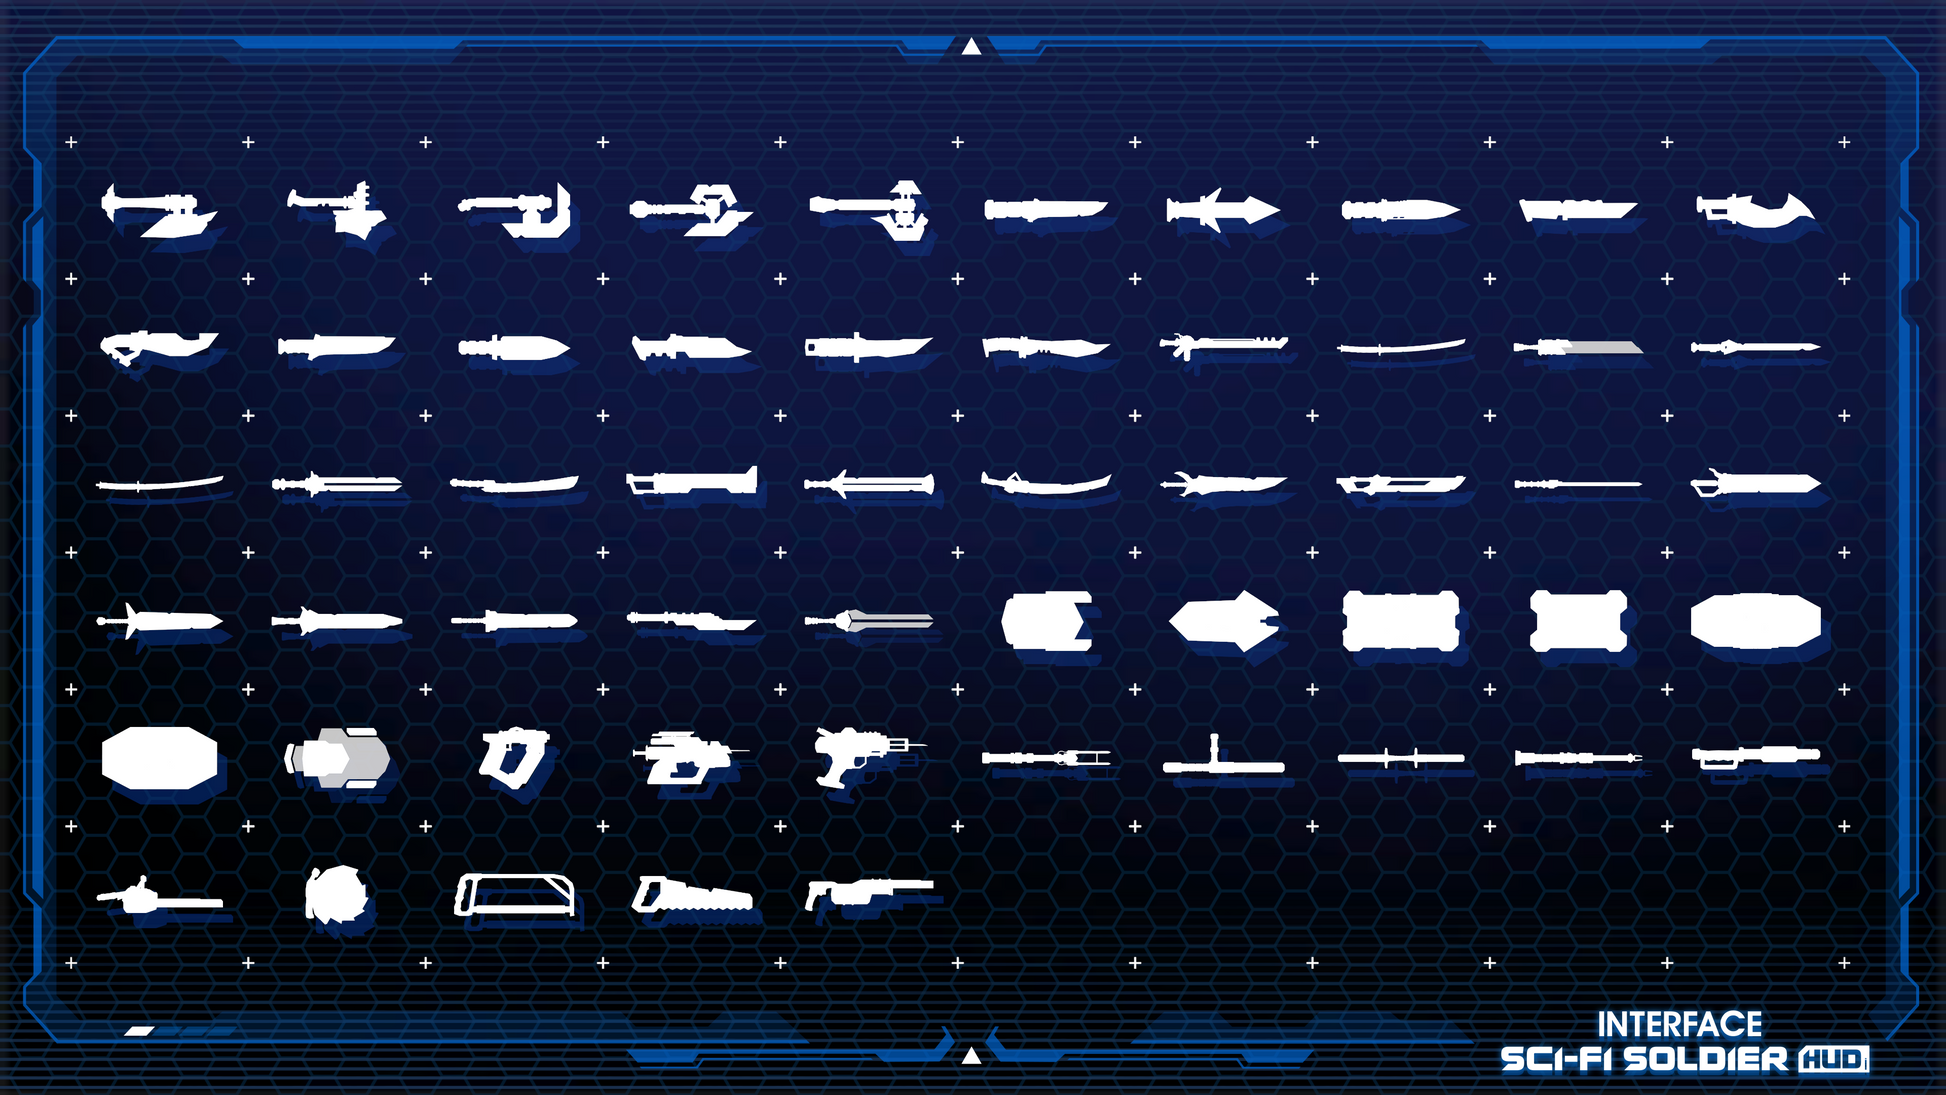 White icons of weapons and tools for characters from the INTERFACE Sci-Fi Soldier HUD 3D game asset pack